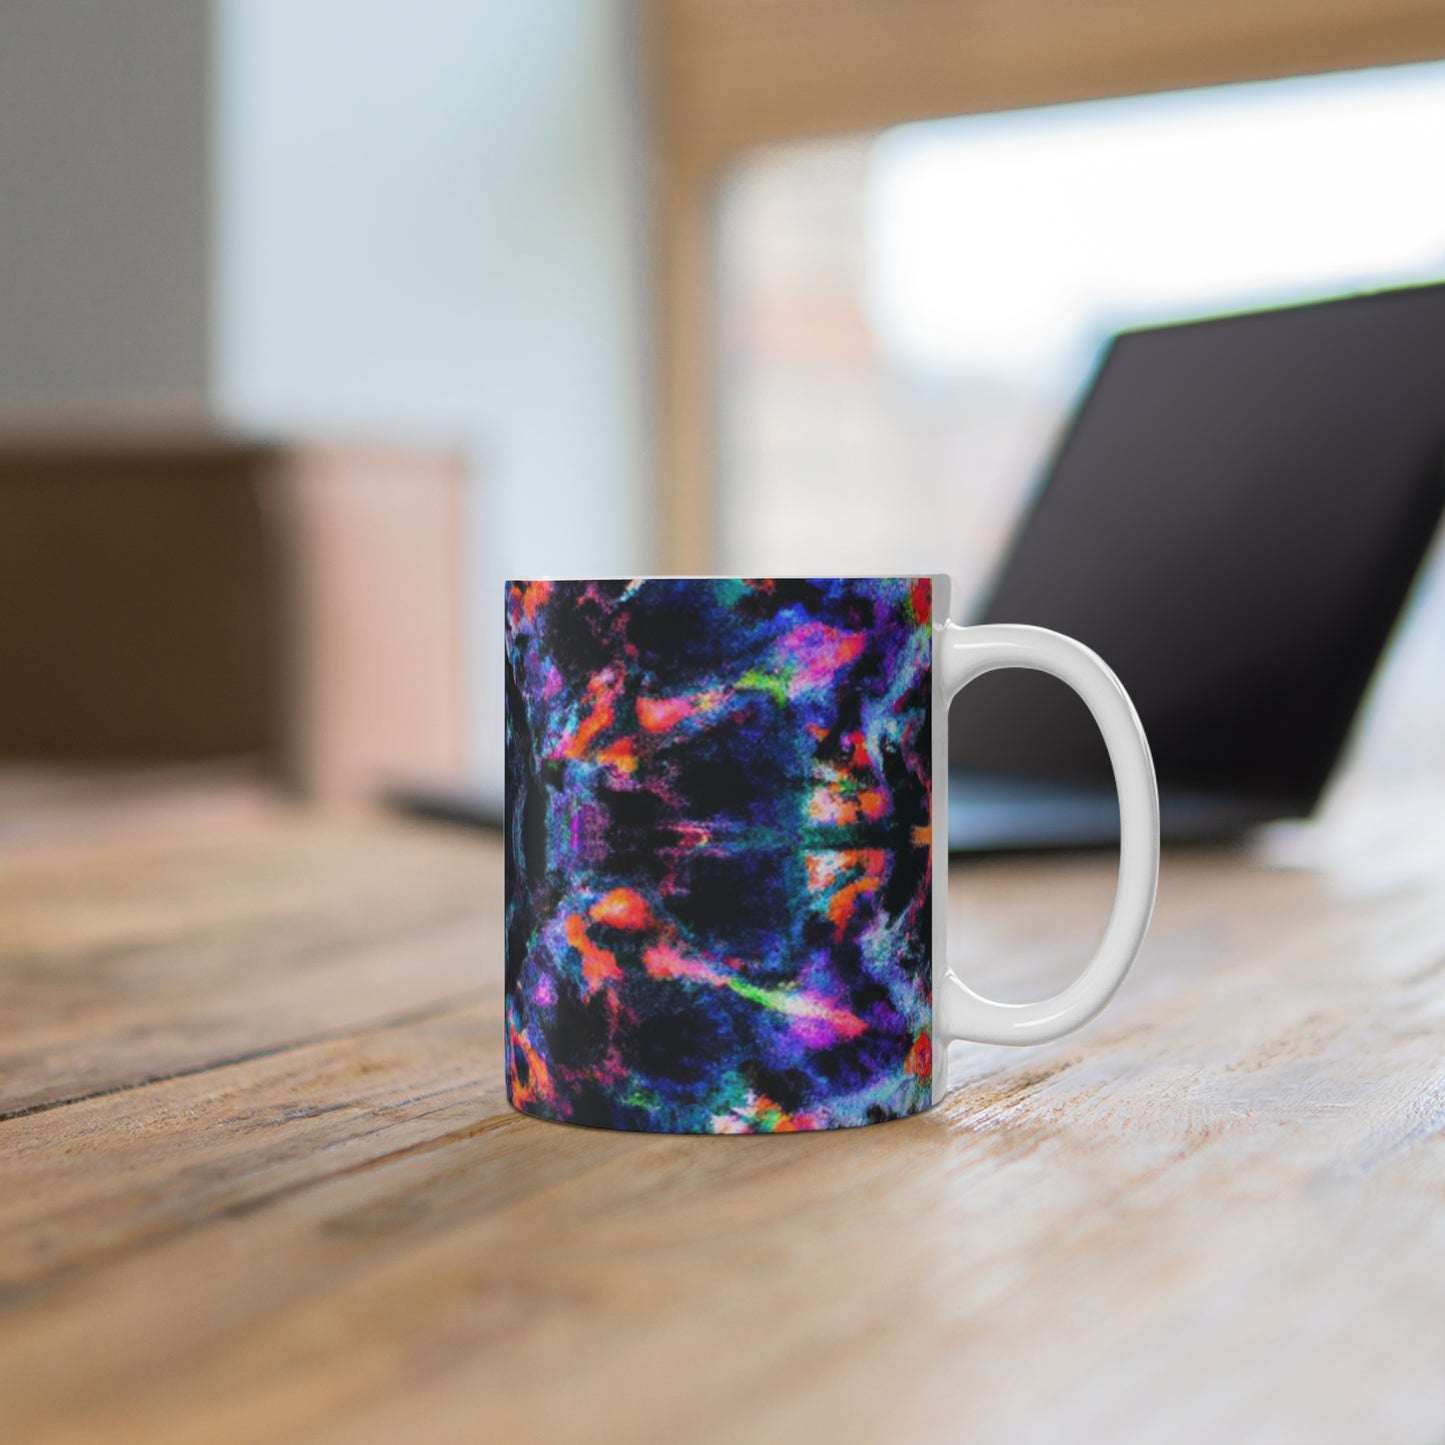 Percy Brewster's Finest Blend - Psychedelic Coffee Cup Mug 11 Ounce